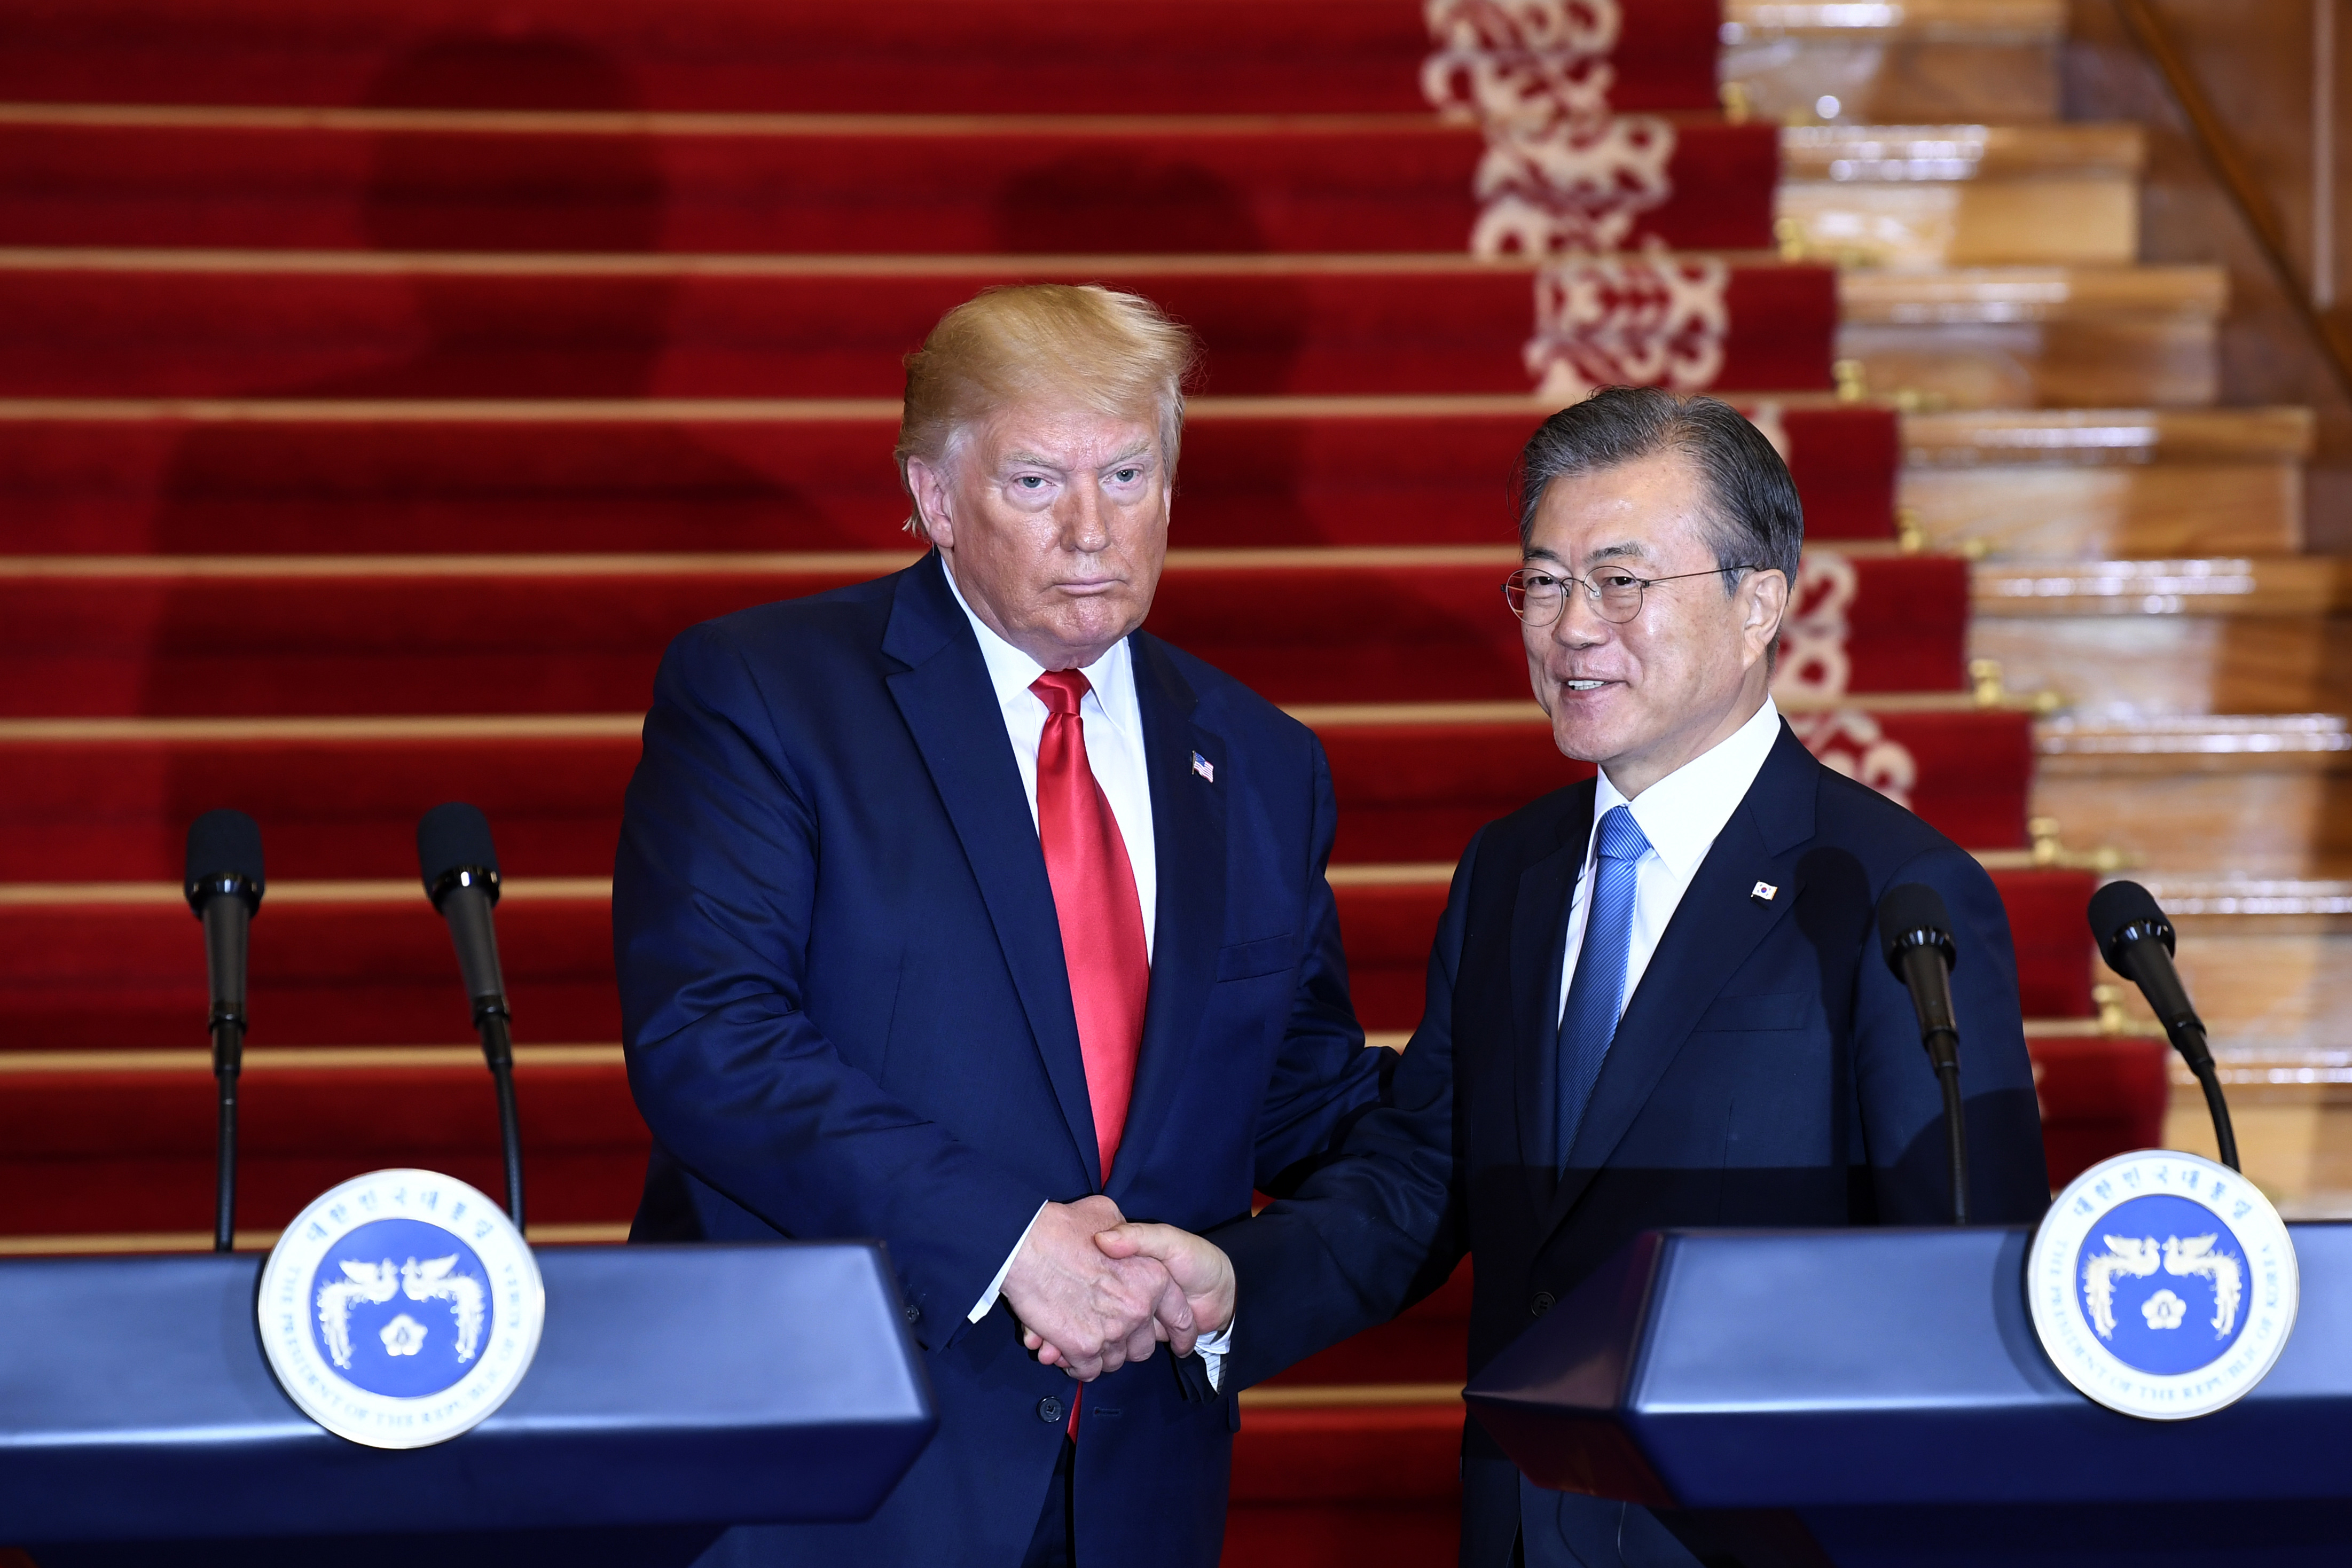 President Donald Trump, left, and South Korean President Moon Jae-in shake hands following their news conference at the Blue House in Seoul, Sunday, June 30, 2019. (AP Photo/Susan Walsh)